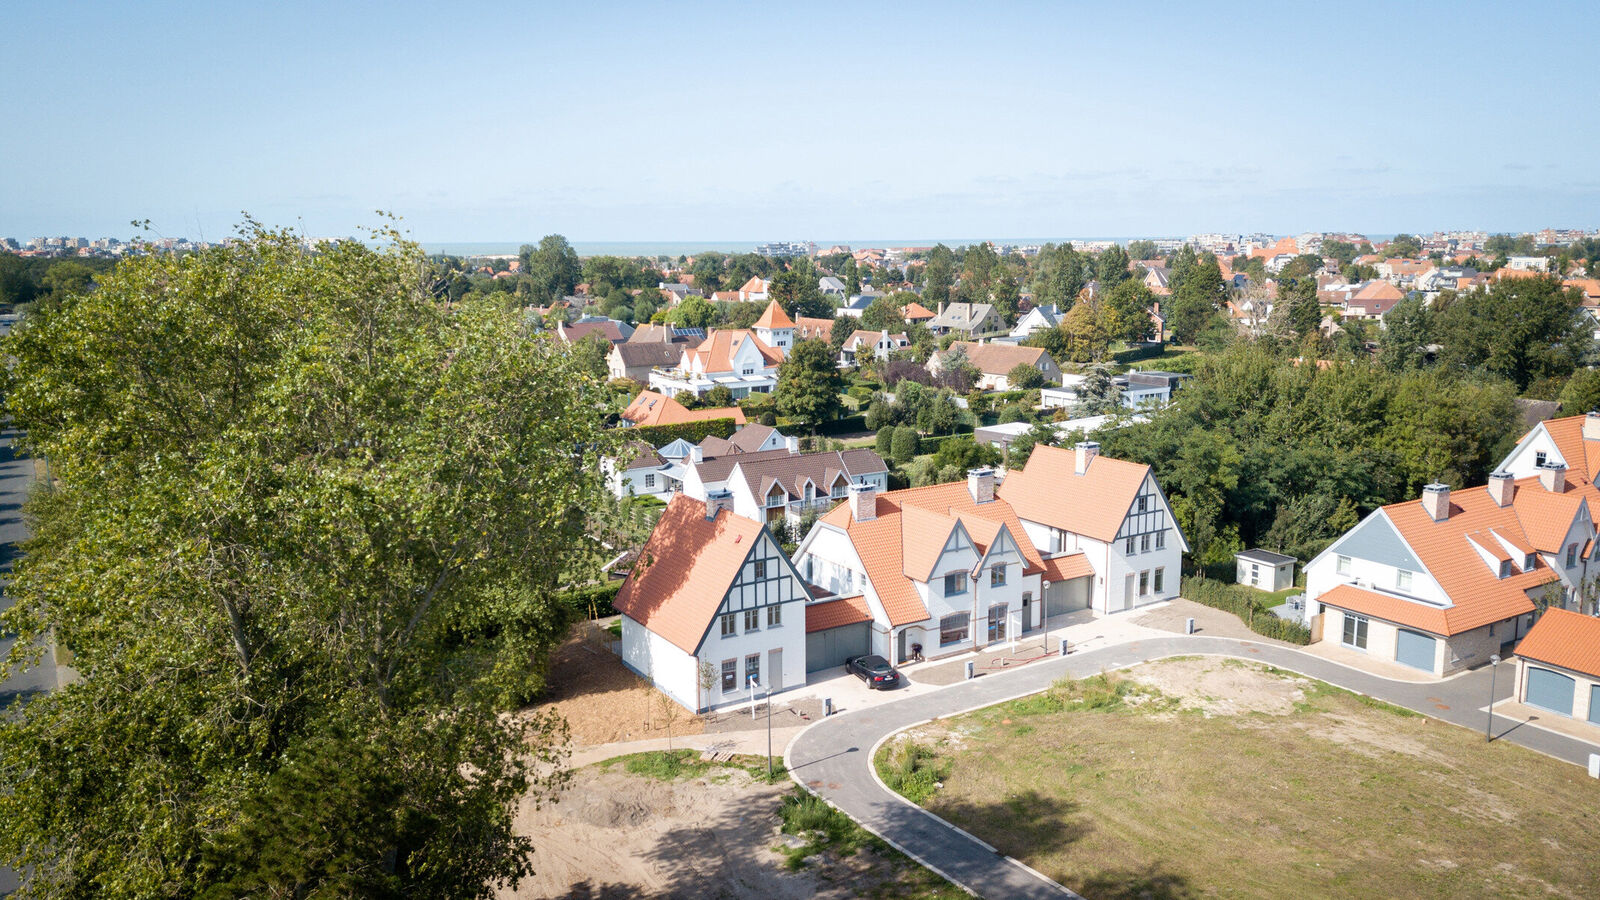 Building ground for sale in Sint-Idesbald